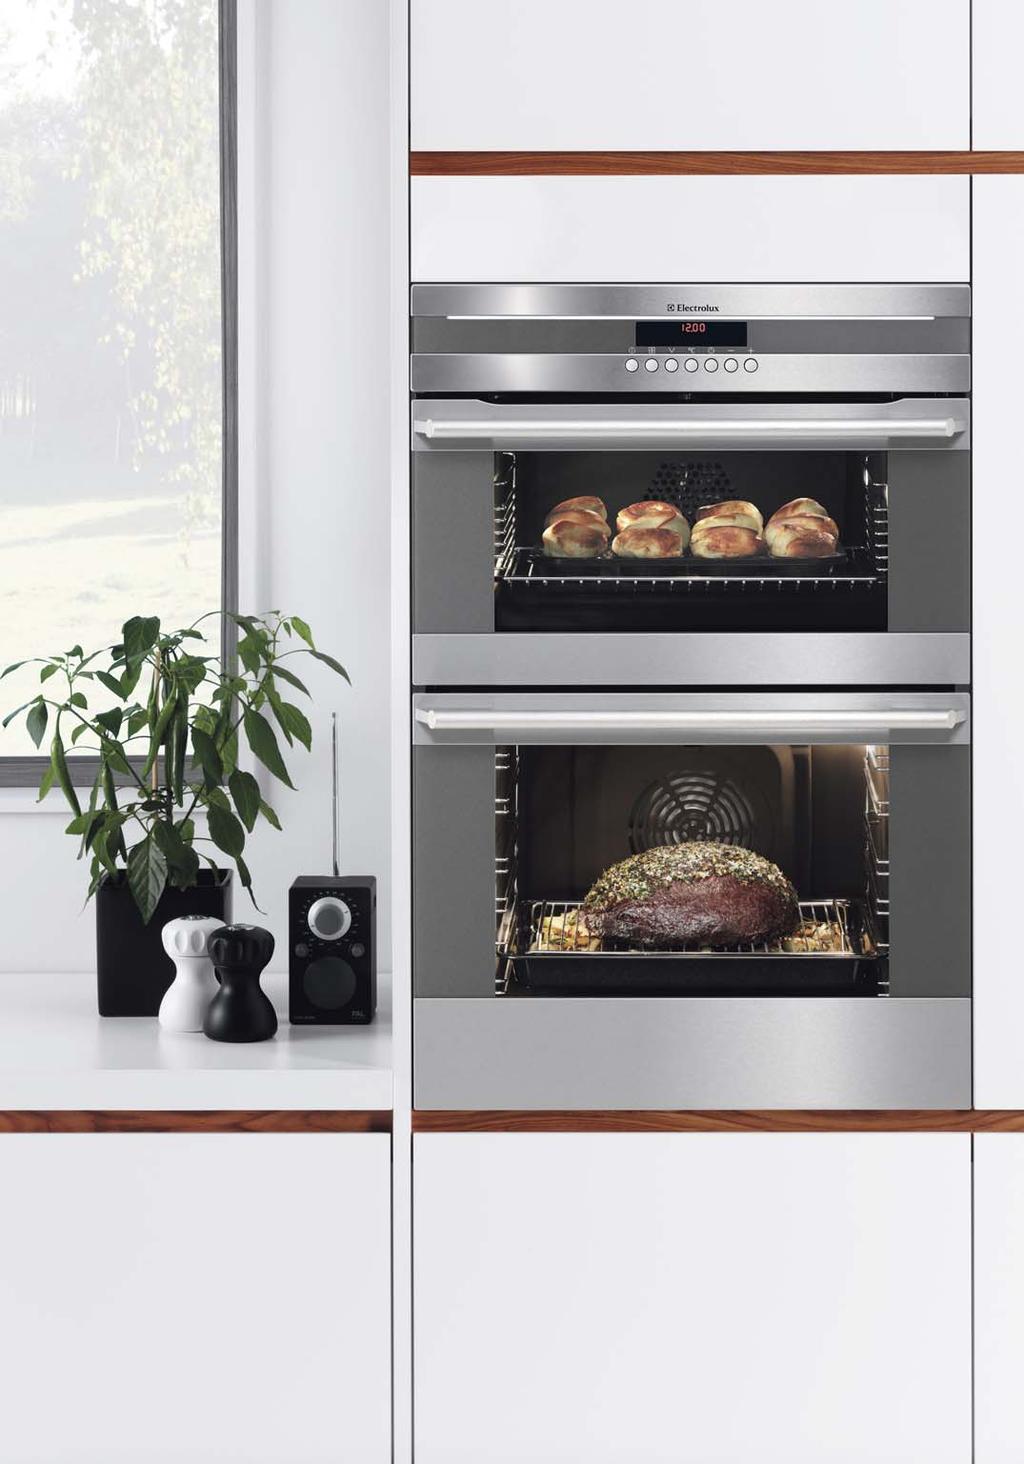 8 electrolux cooking electrolux cooking 9 Single and double ovens with all the trimmings! The oven is no doubt one of the most important appliances in your kitchen.